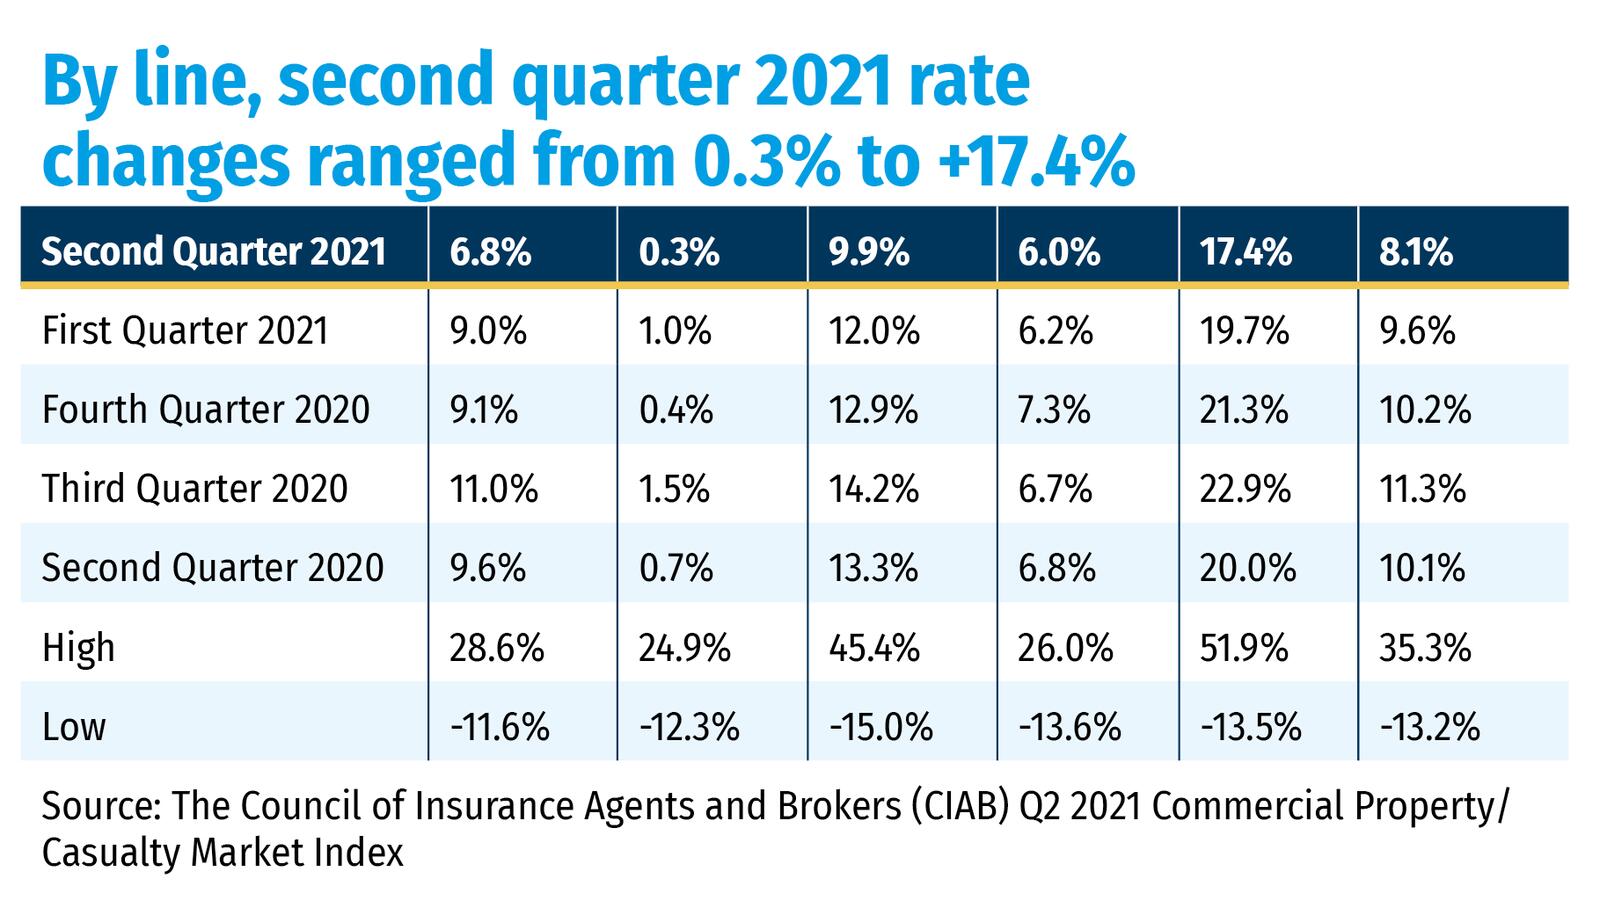 By line, second quarter 2021 rate changes ranged from 0.3% to +17.4%